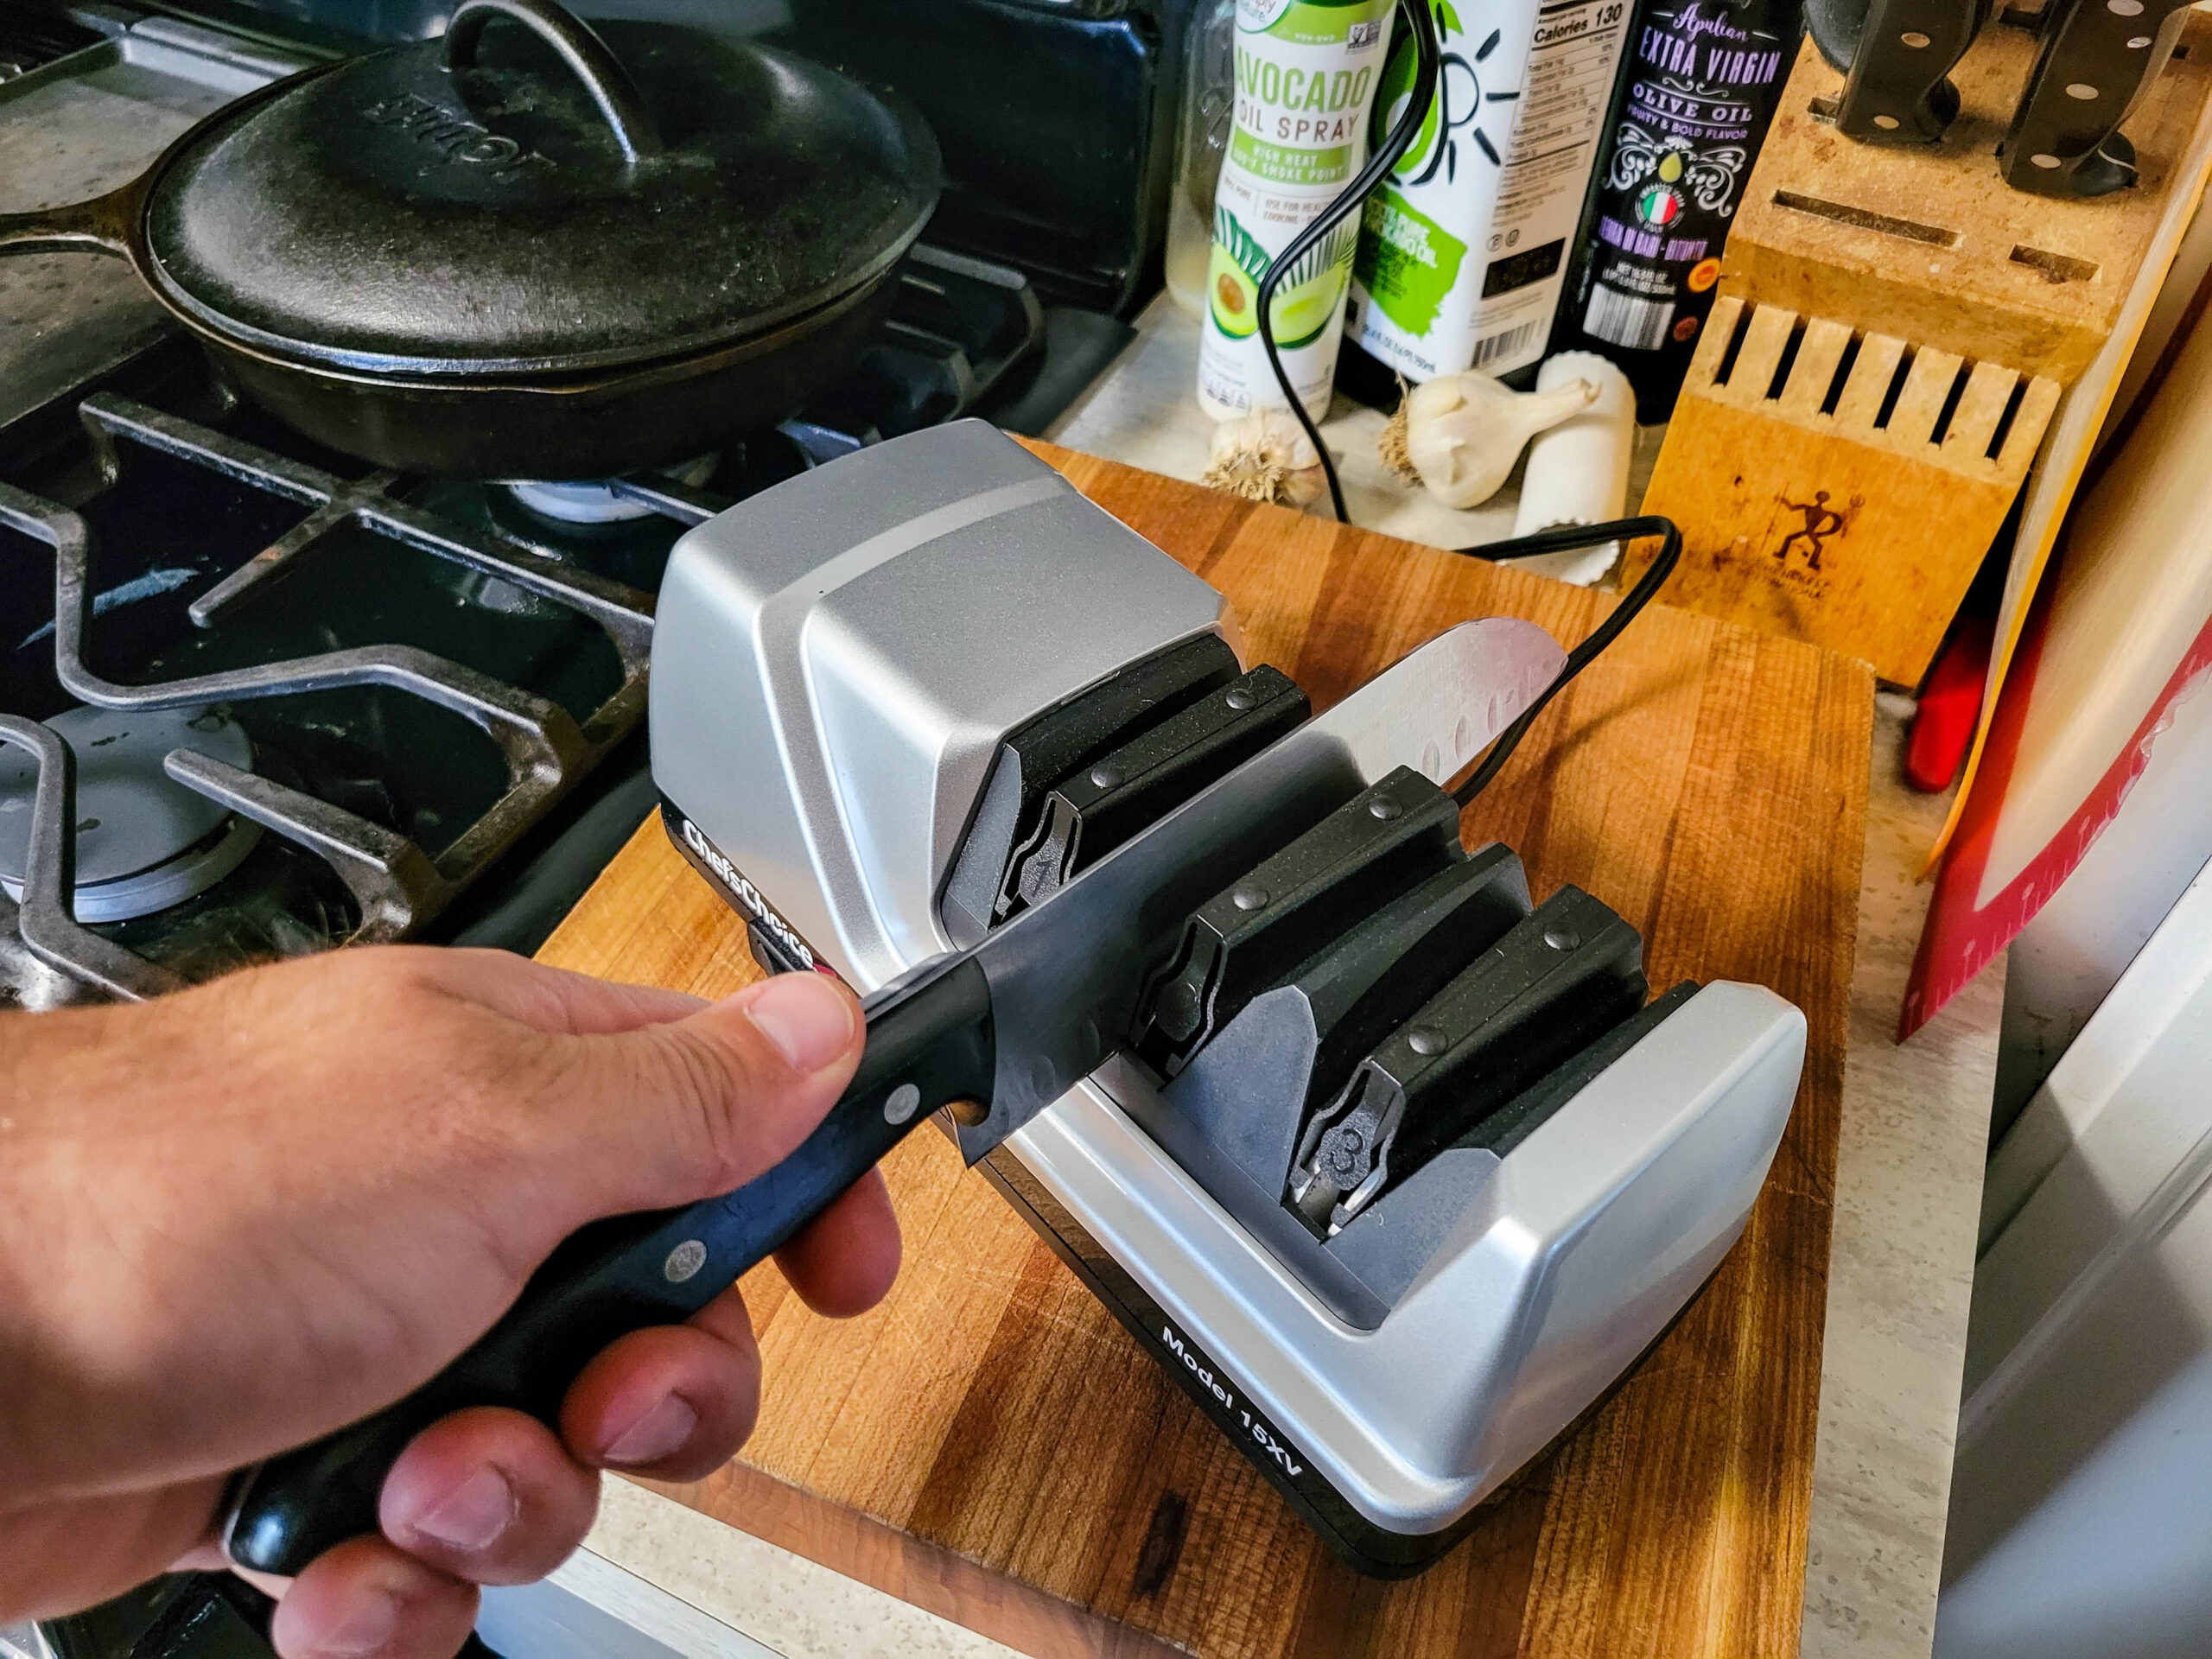 The Best Knife Sharpeners of 2023